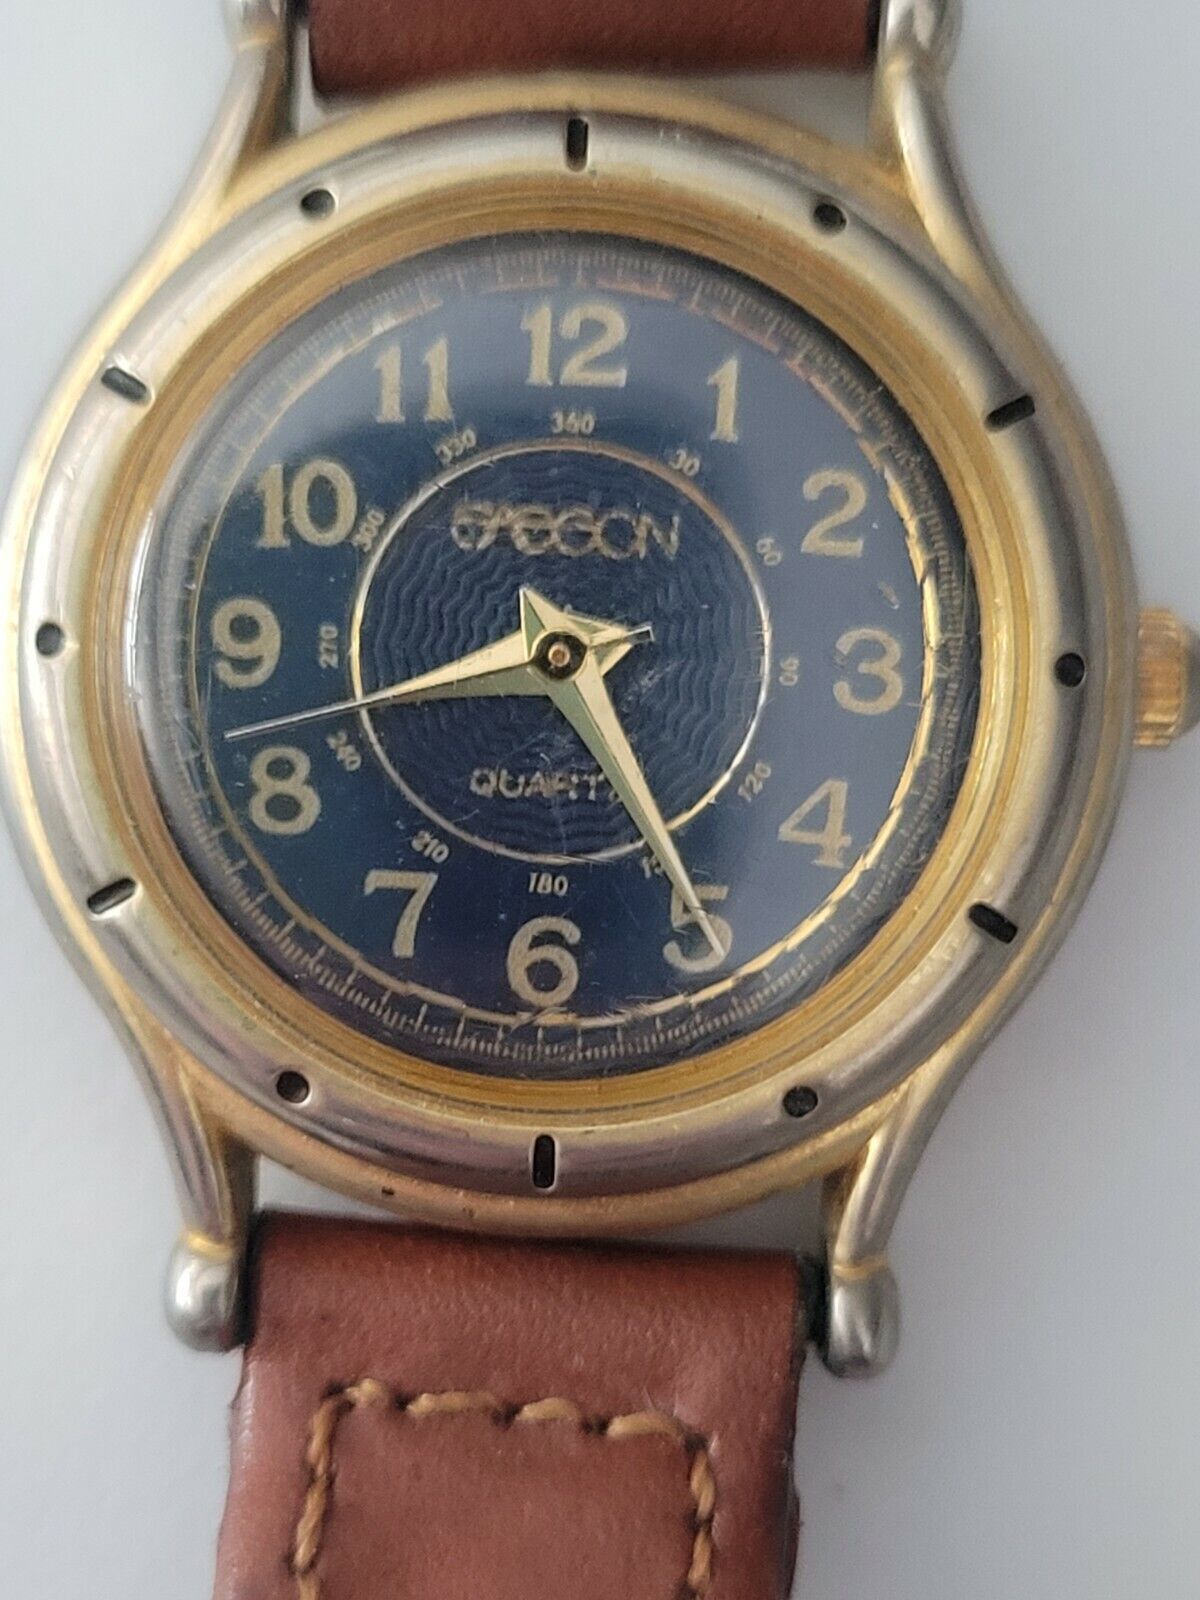 Sasson Quartz Unisex Watch#134. Needs Battery. Band Is Worn.Sold As Is.